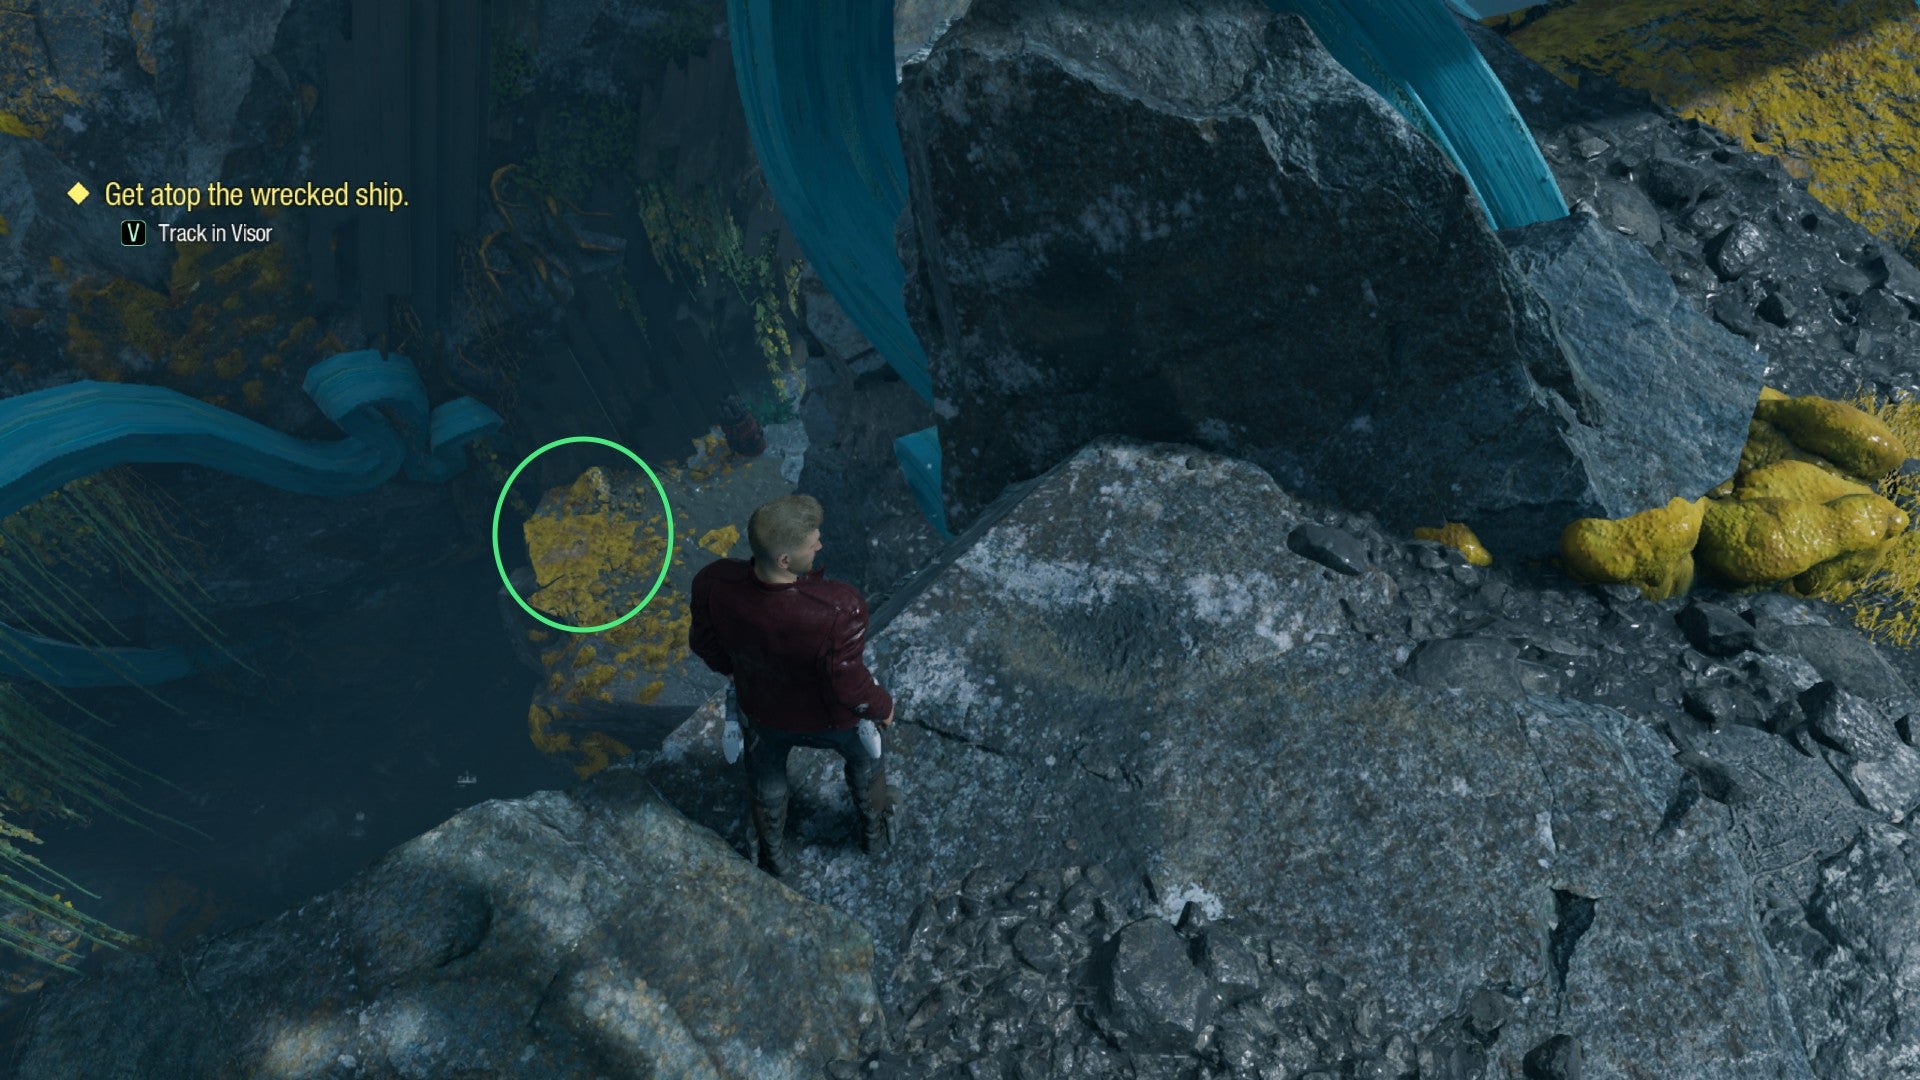 Star-Lord standing on cliff edge with collectible on ground below circled